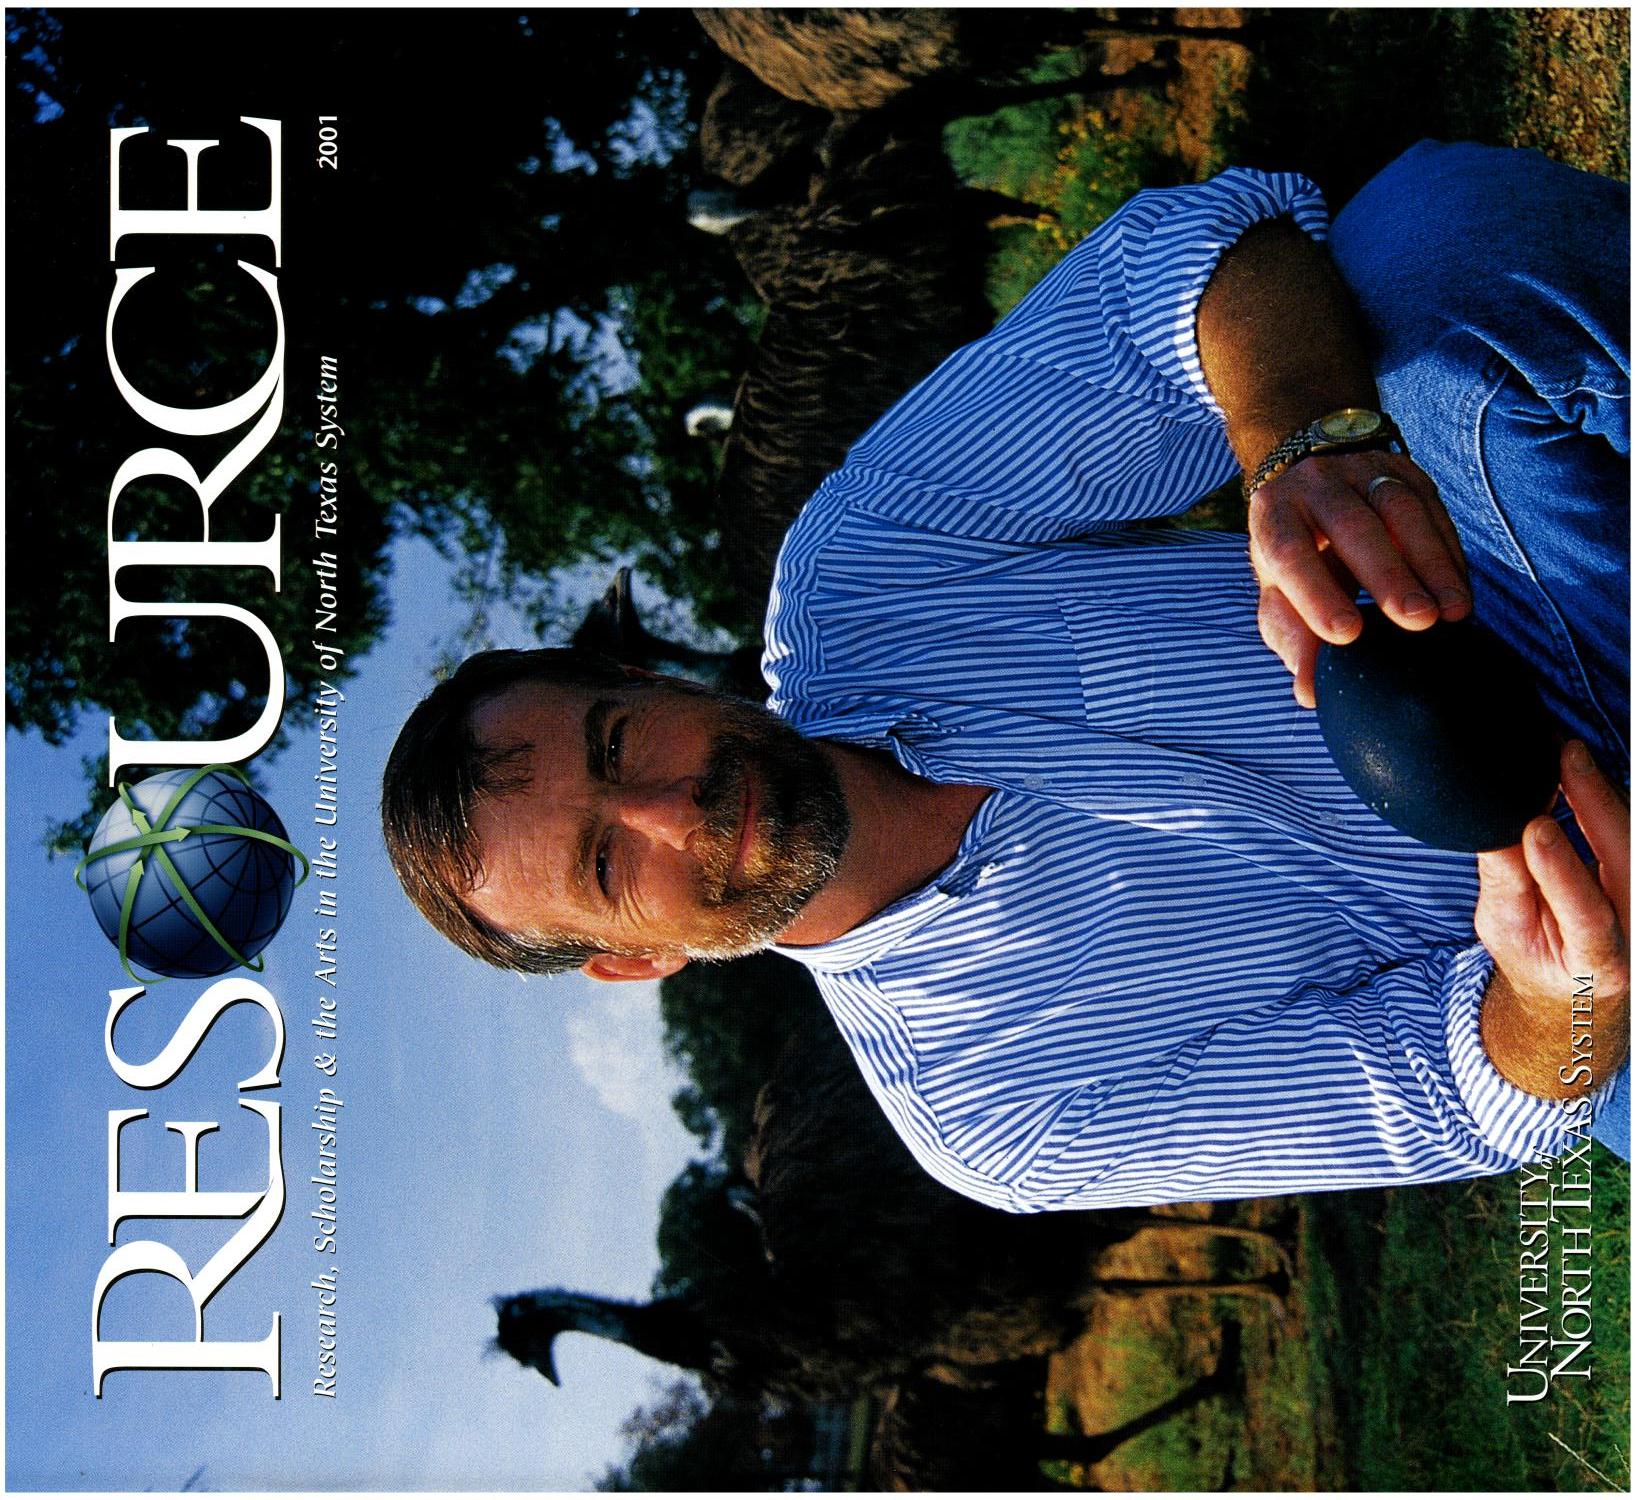 ReSource, Volume 13, 2001
                                                
                                                    Front Cover
                                                